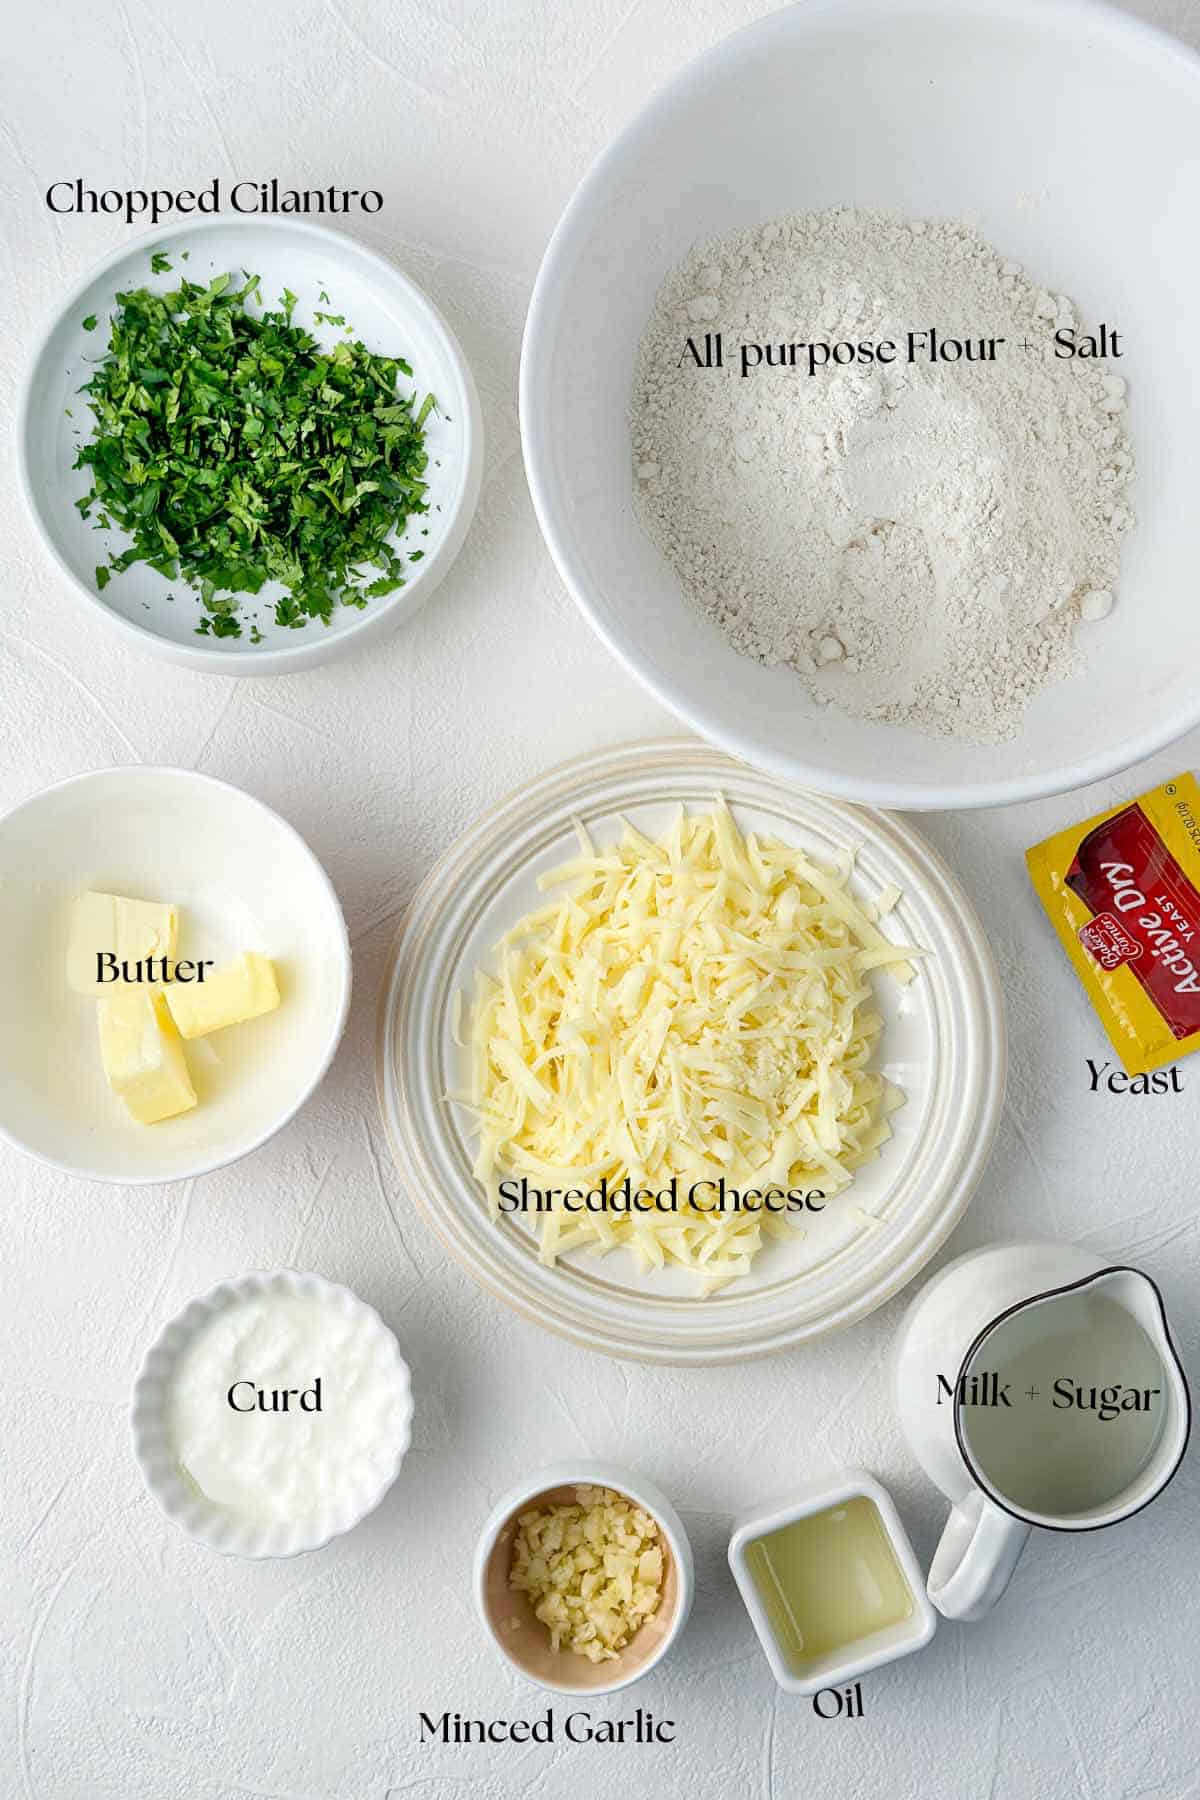 image showing all the ingredients required for making the cheese stuffed naan